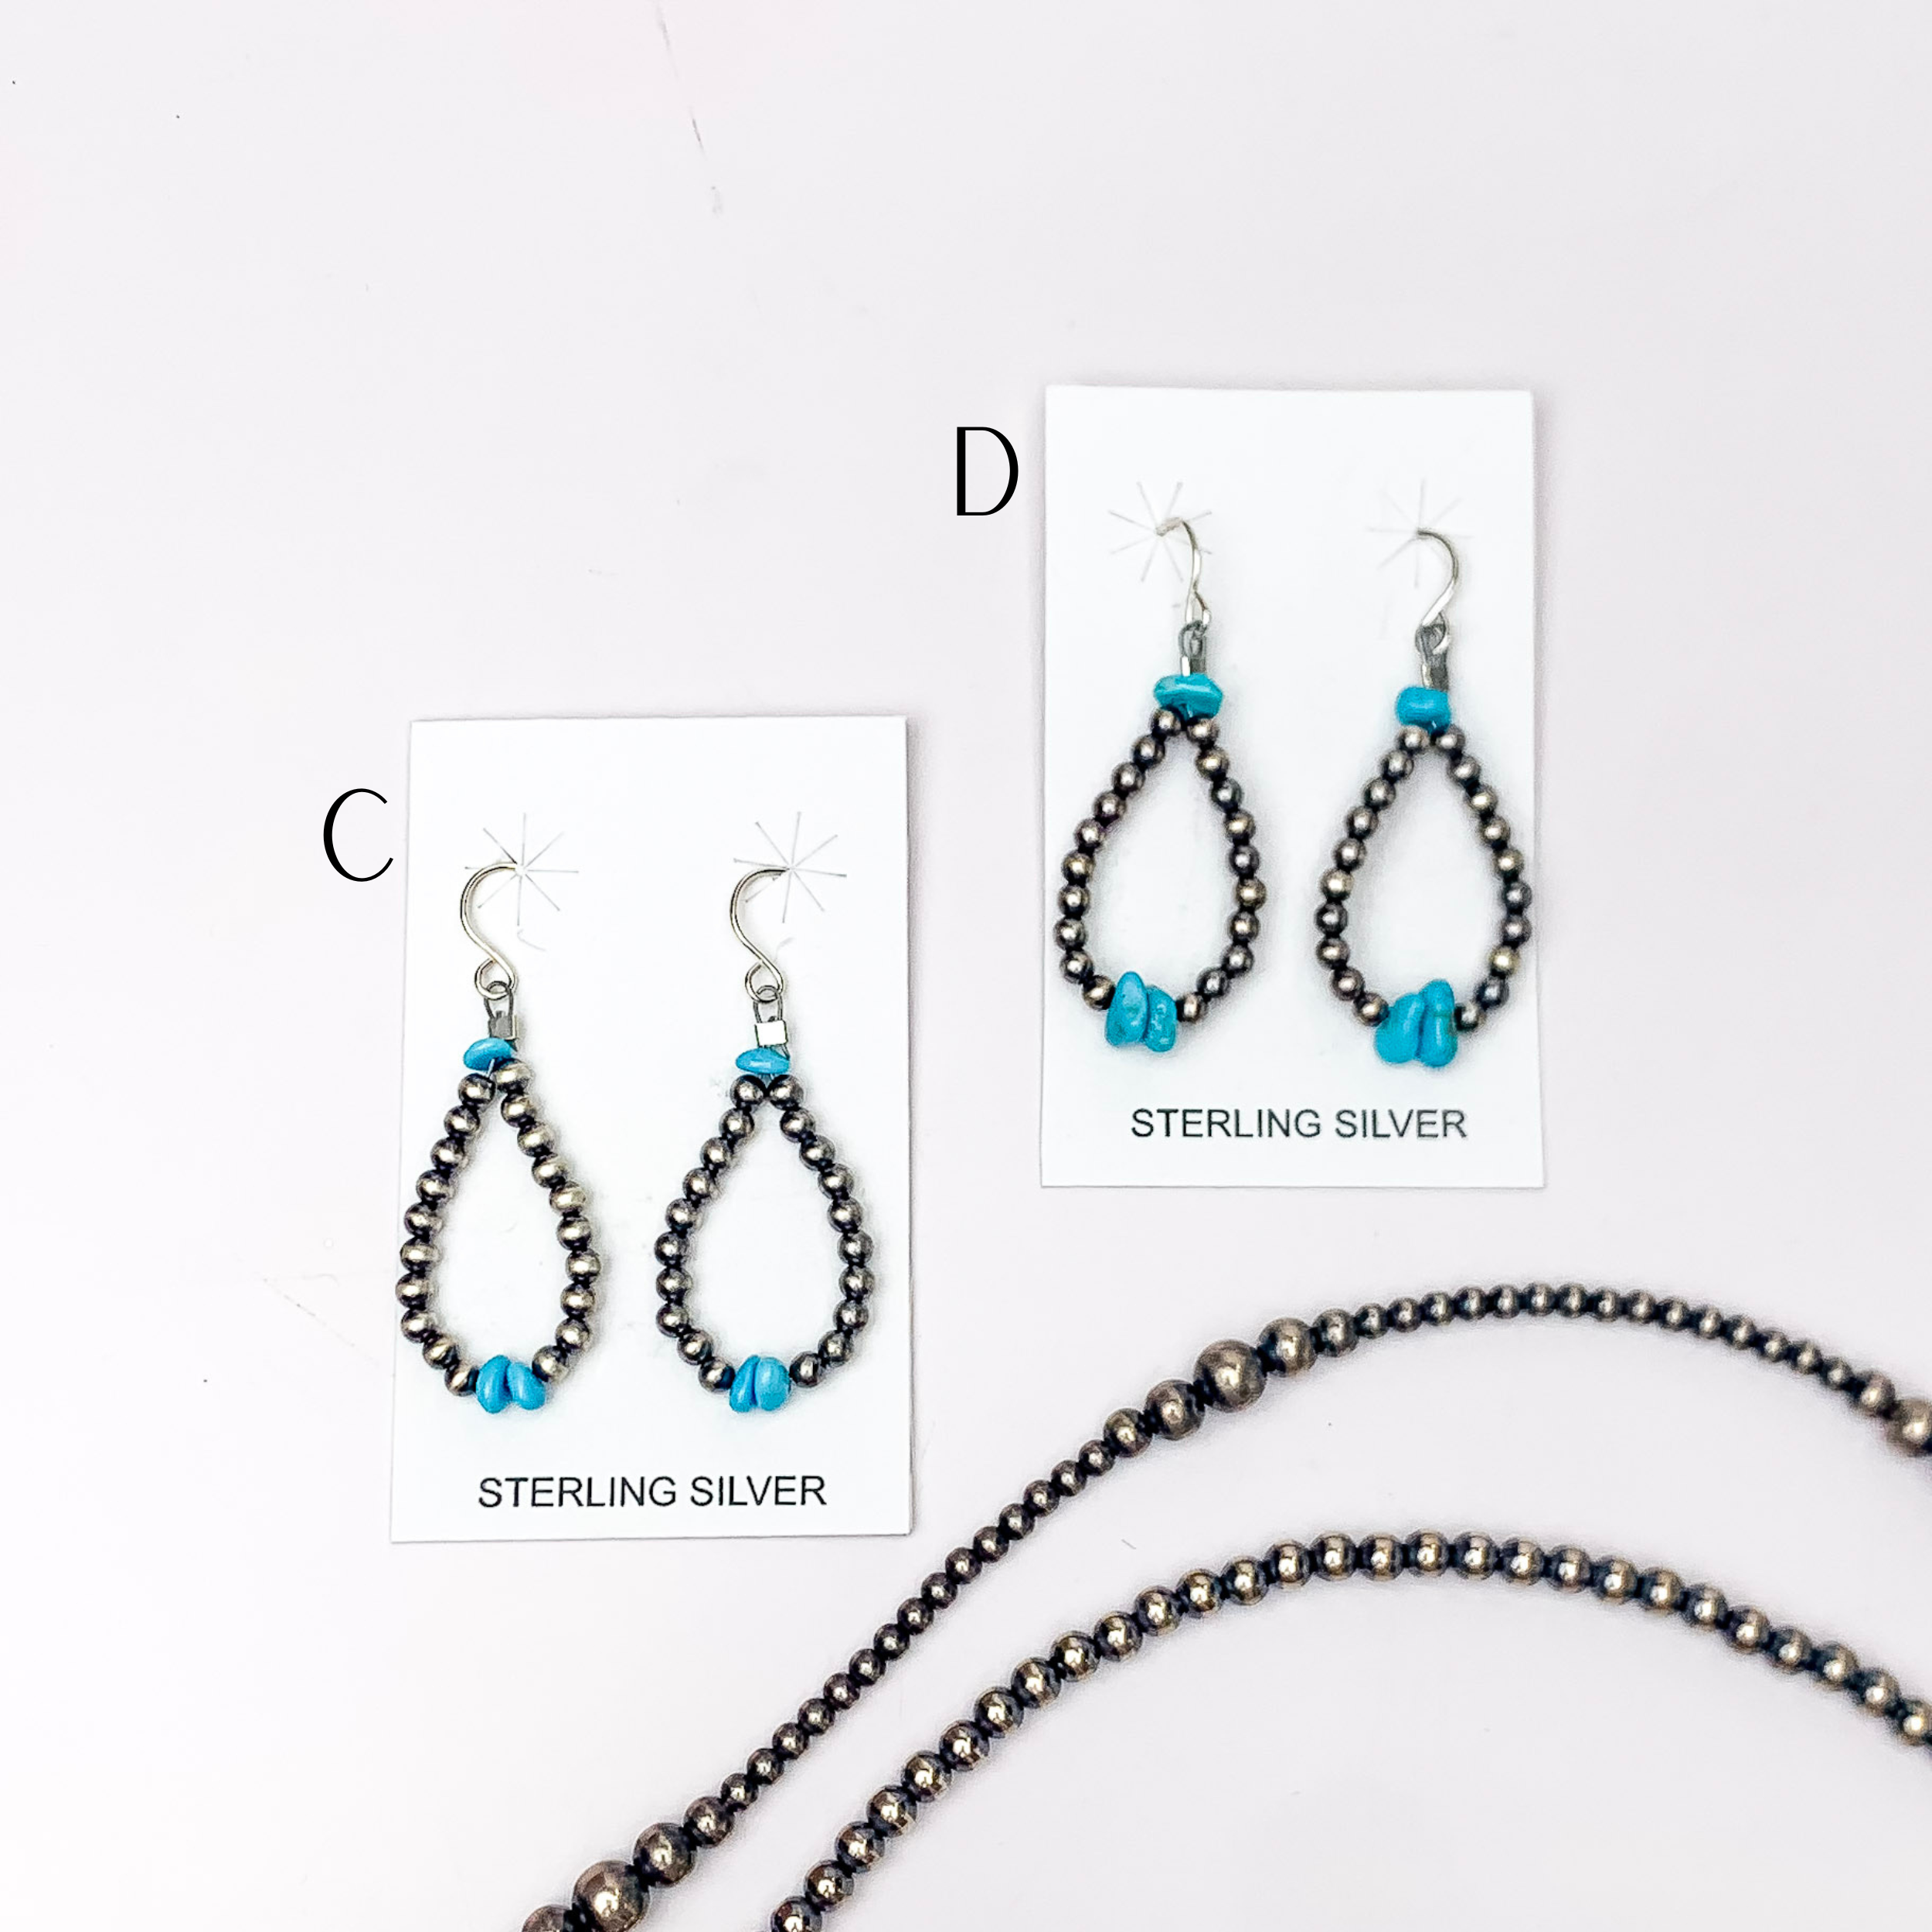 Mason Lee | Genuine Hand-Strung Navajo Beaded Teardrop Pearl Earrings - Giddy Up Glamour Boutique